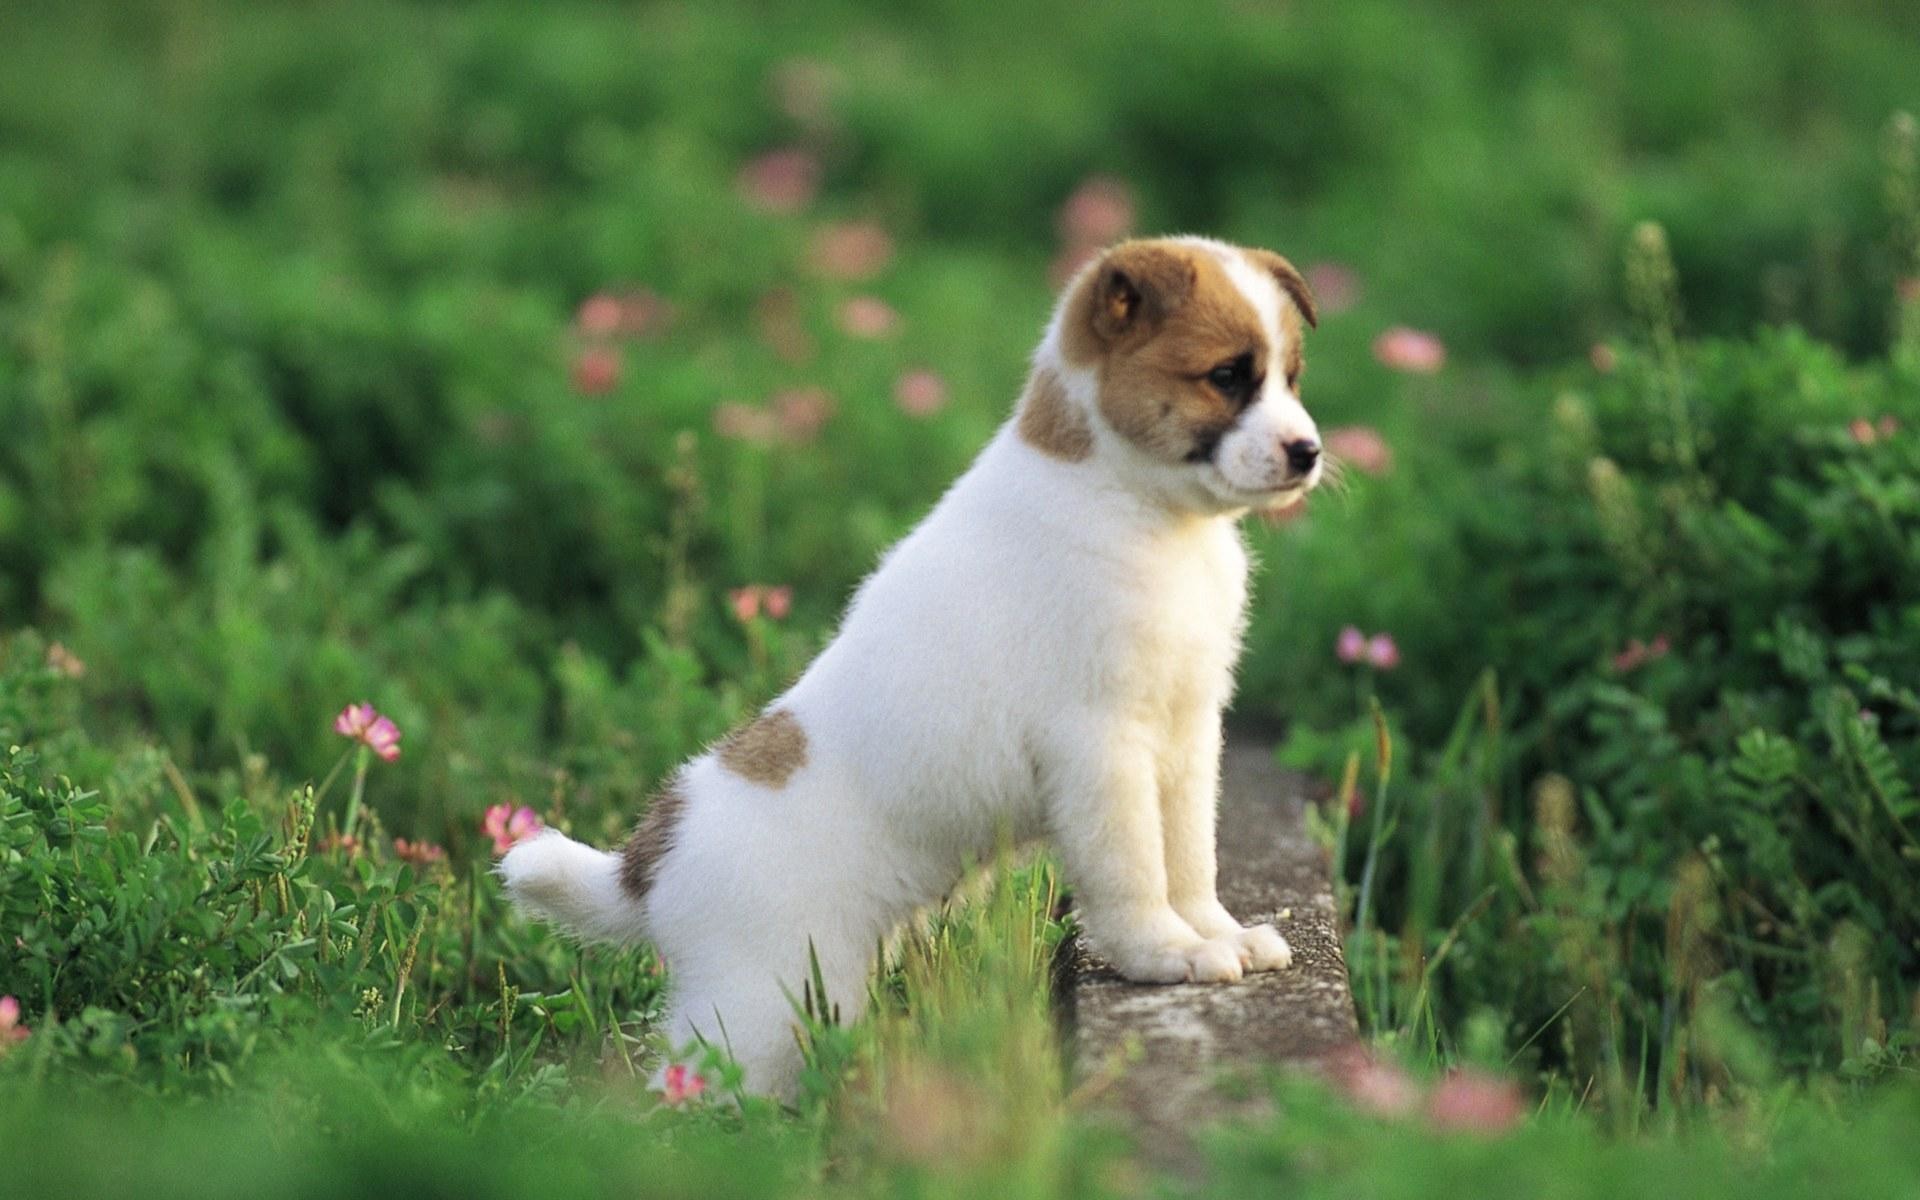 1920x1200 HD Wallpaper and background photos of Pretty Dog wallpaper for fans of  Puppies images.